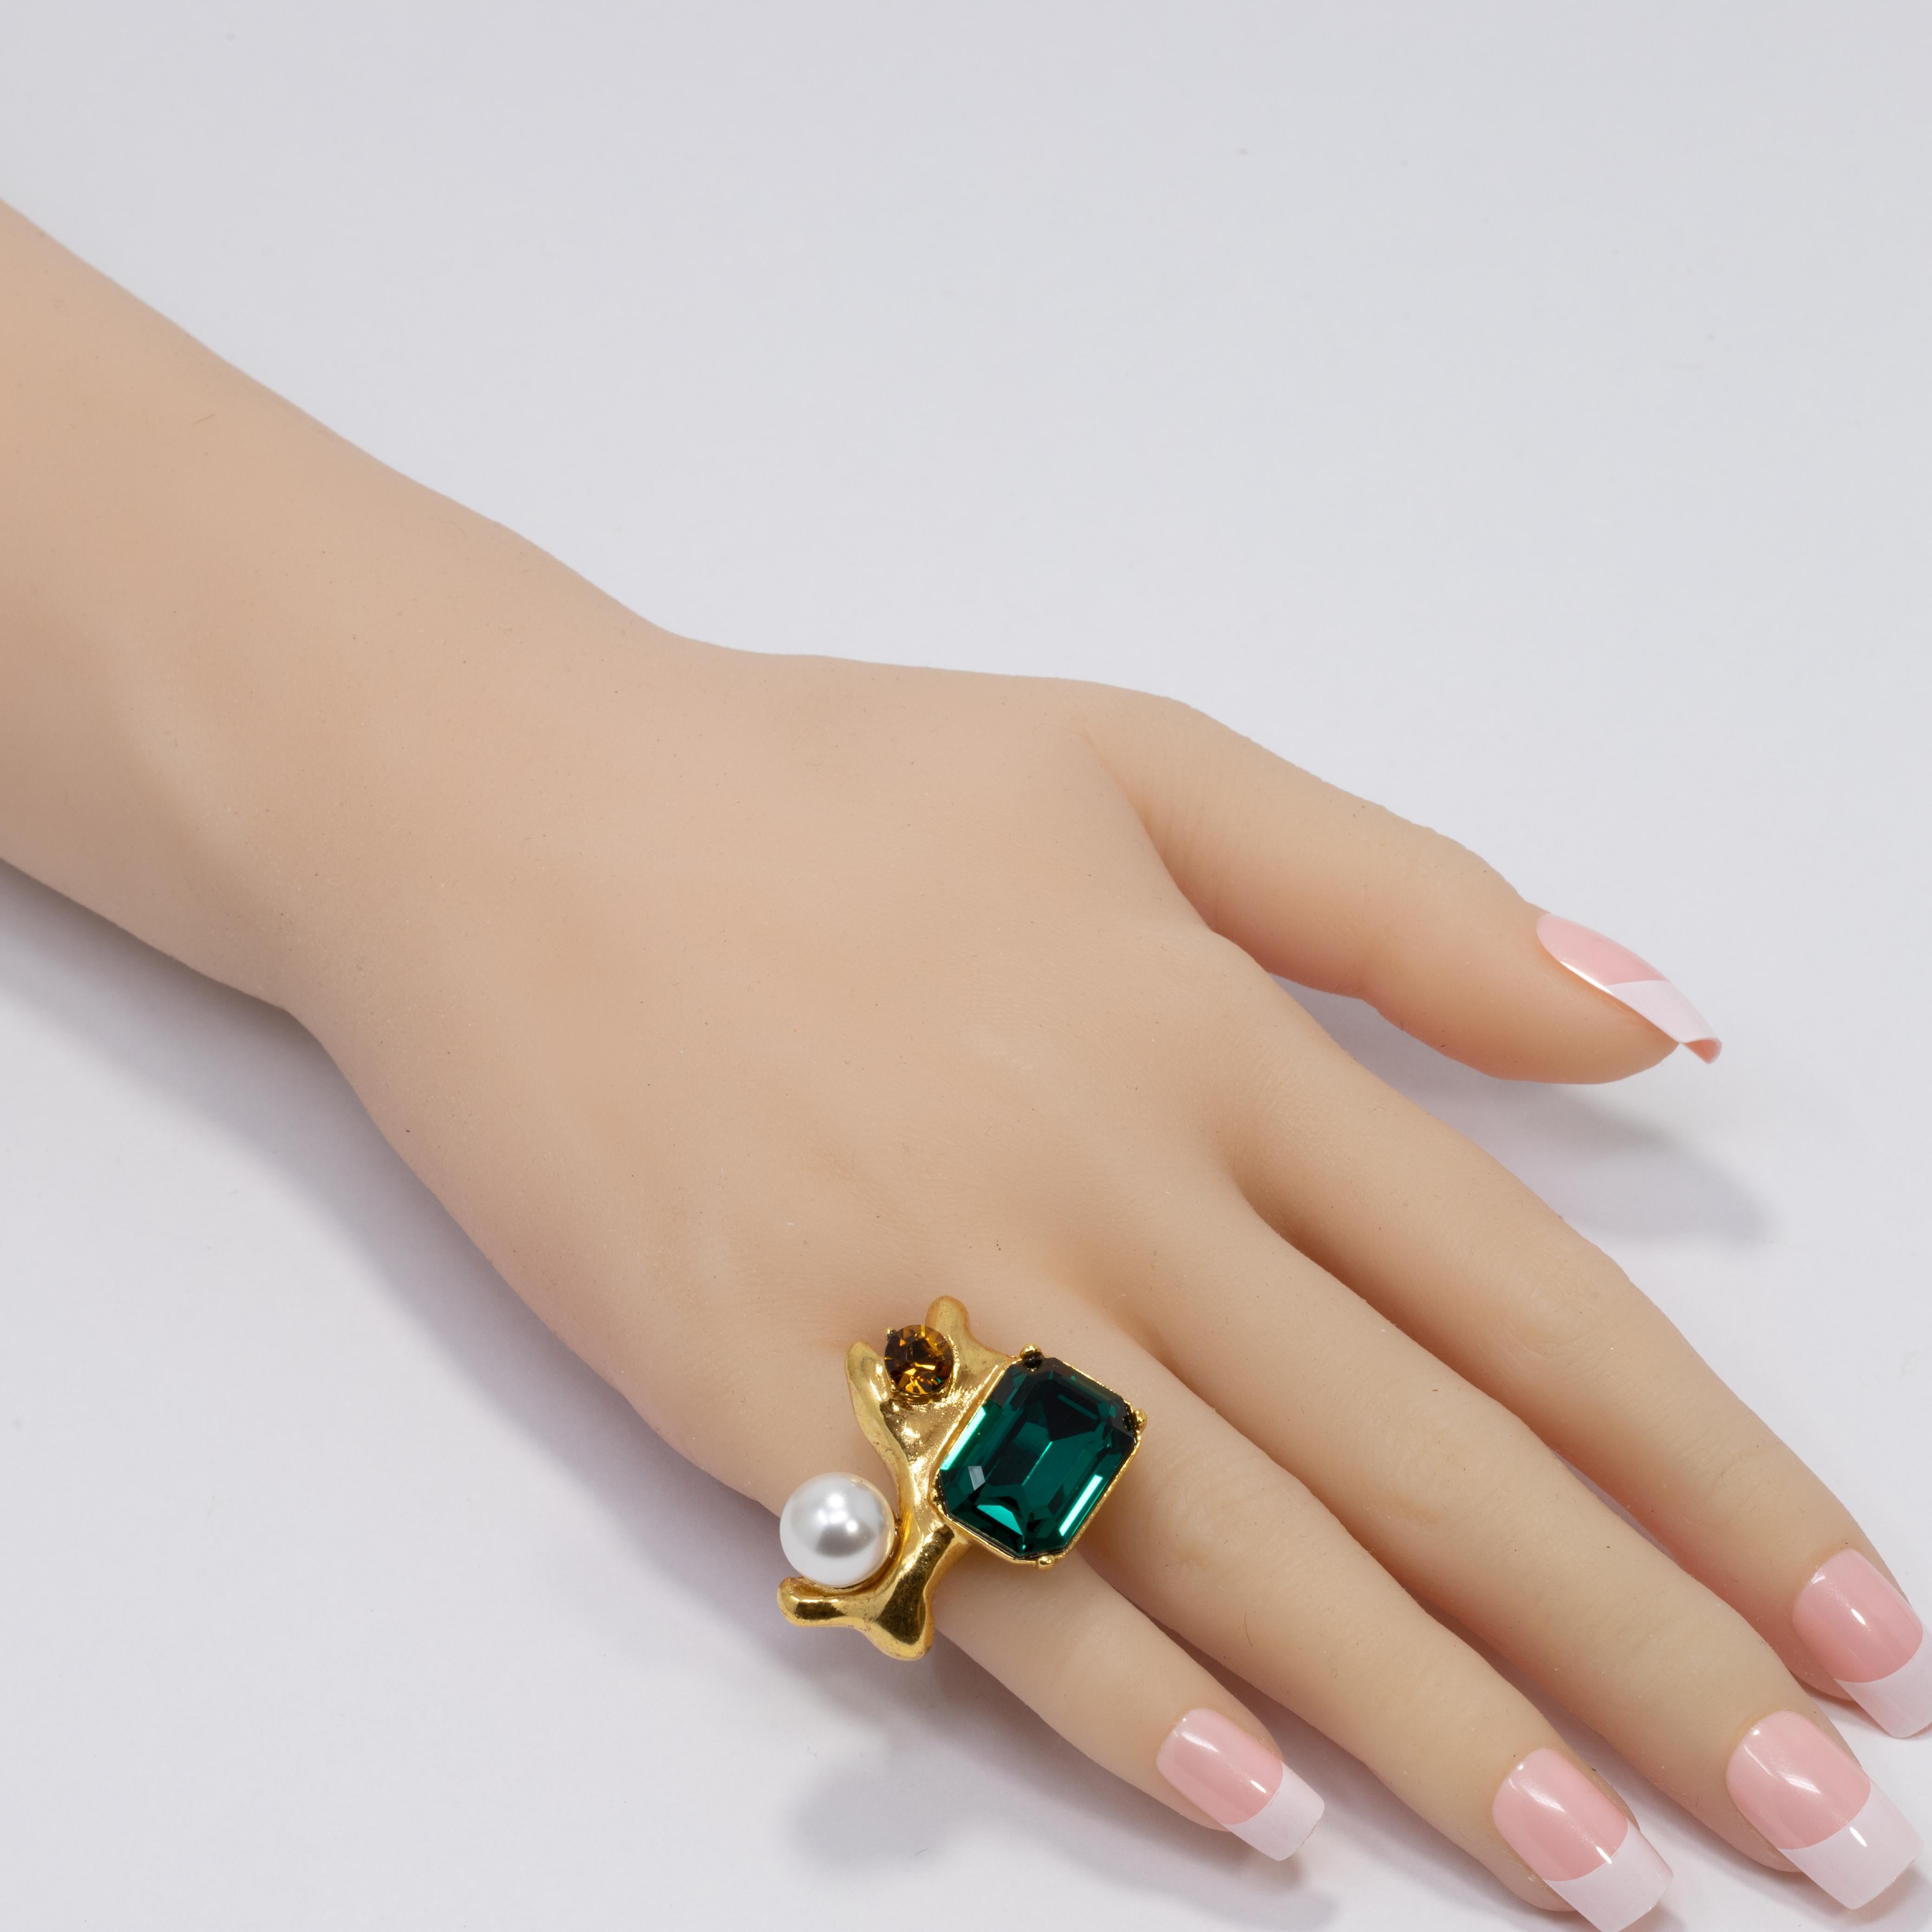 A bold statement ring by Oscar de la Renta. Features two prong set crystals, one in emerald green and the other in amber-orange, accented with a single faux pearl. Set on a stylized gold plated band.

Ring size: Adjustable, US 4-8
Face dimensions: 3